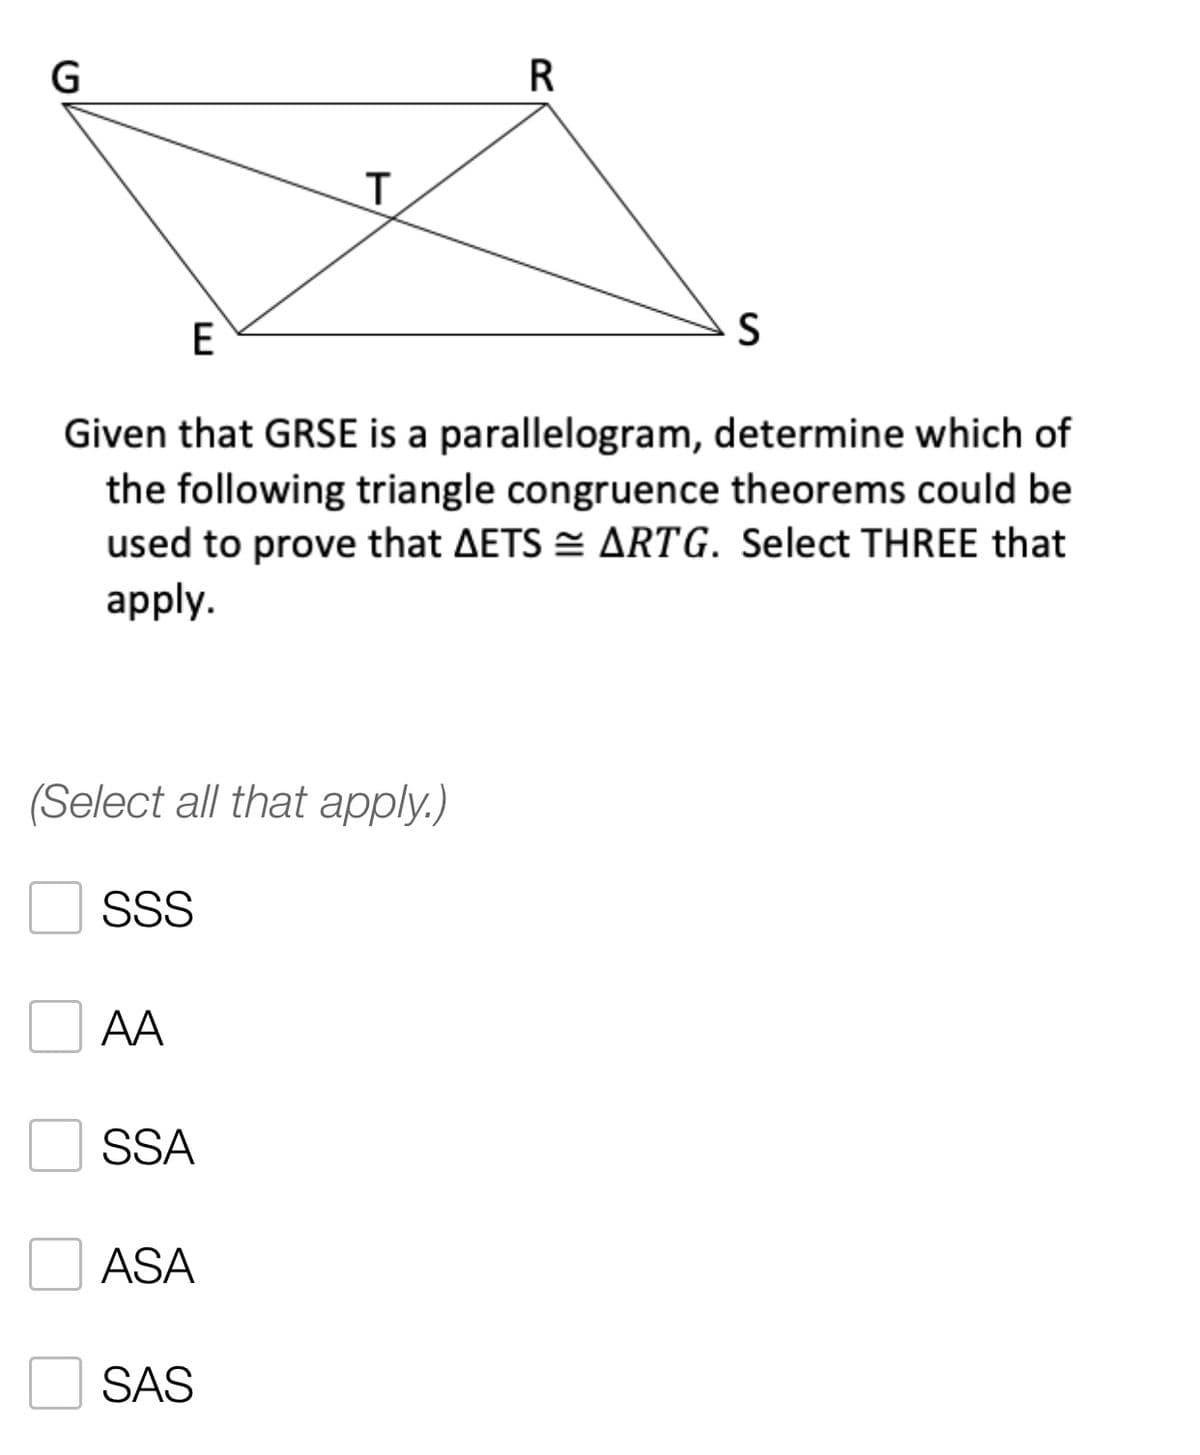 R
T
E
S
Given that GRSE is a parallelogram, determine which of
the following triangle congruence theorems could be
used to prove that AETS ARTG. Select THREE that
apply.
(Select all that apply.)
SSS
AA
SSA
ASA
SAS
G